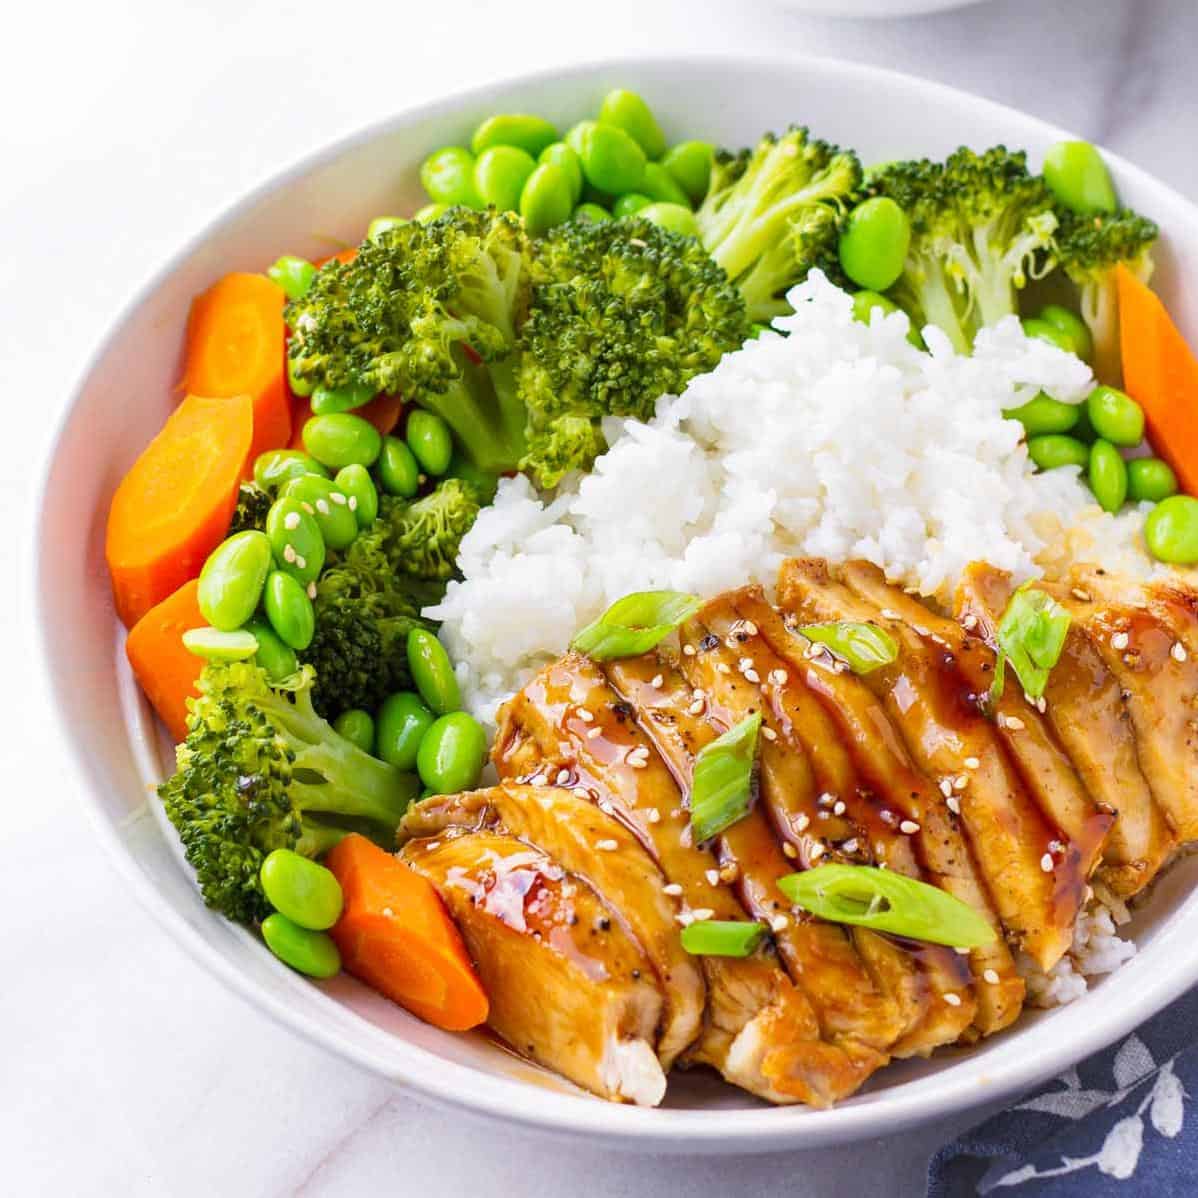  Tender pieces of juicy chicken or beef cook to perfection in a sweet and savory teriyaki sauce